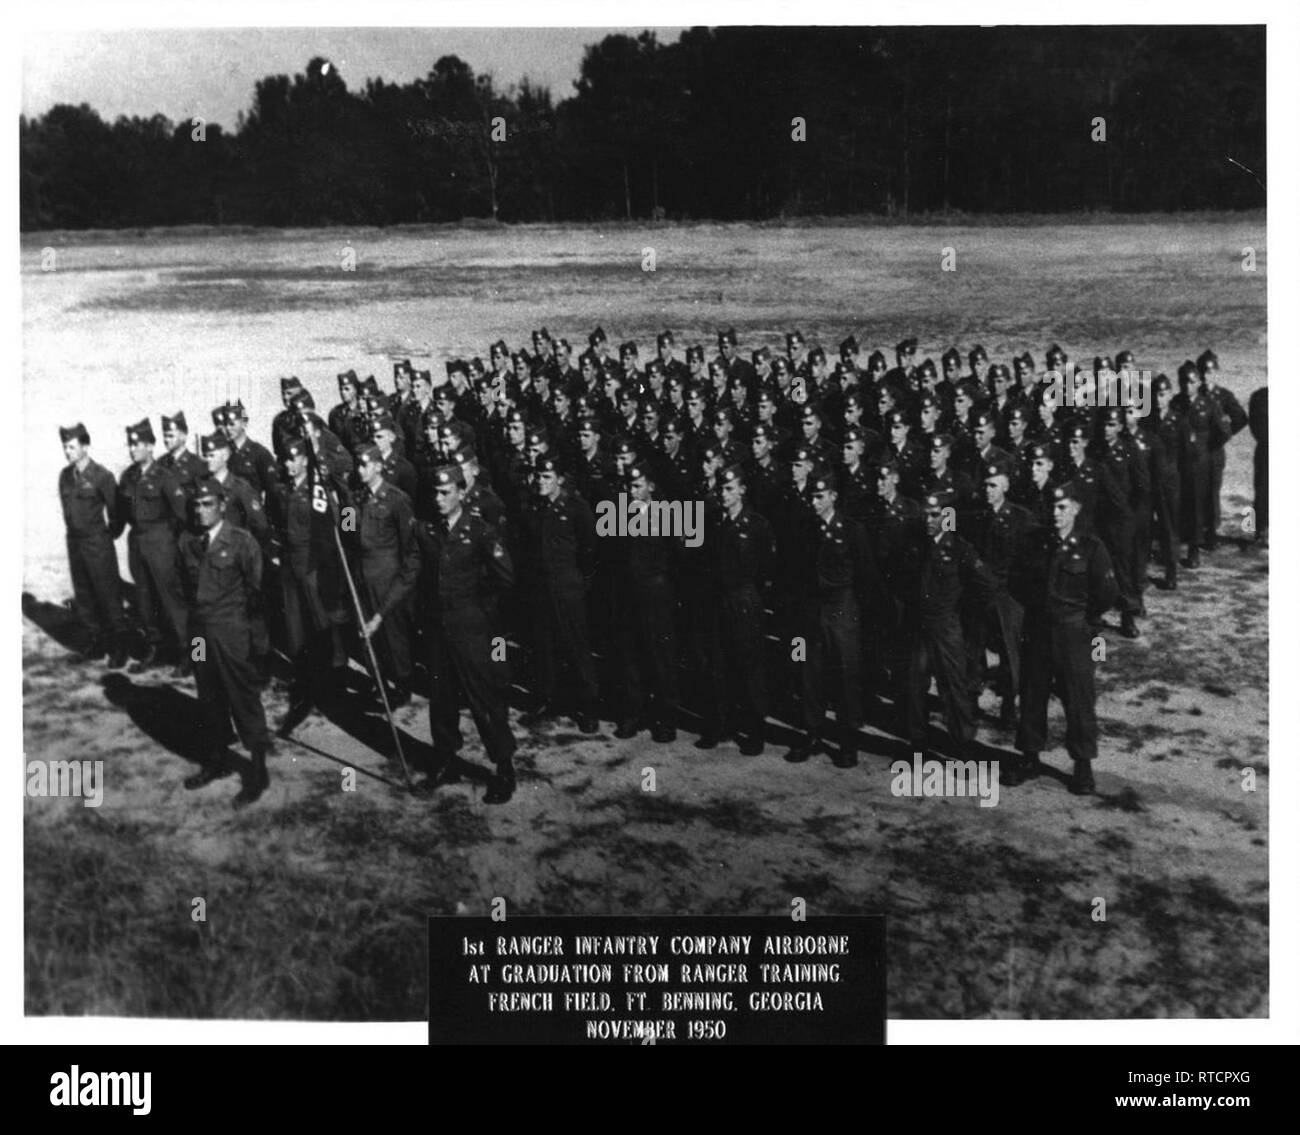 Theodore Spellacy is pictured in the graduation photo of the 1st Ranger Infantry Company, November 1950. Spellacy joined the Army in 1948 at age 17. He retired from active duty in 1984 and is currently serving as the deputy chief of personnel for the 21st Theater Sustainment Command. Stock Photo